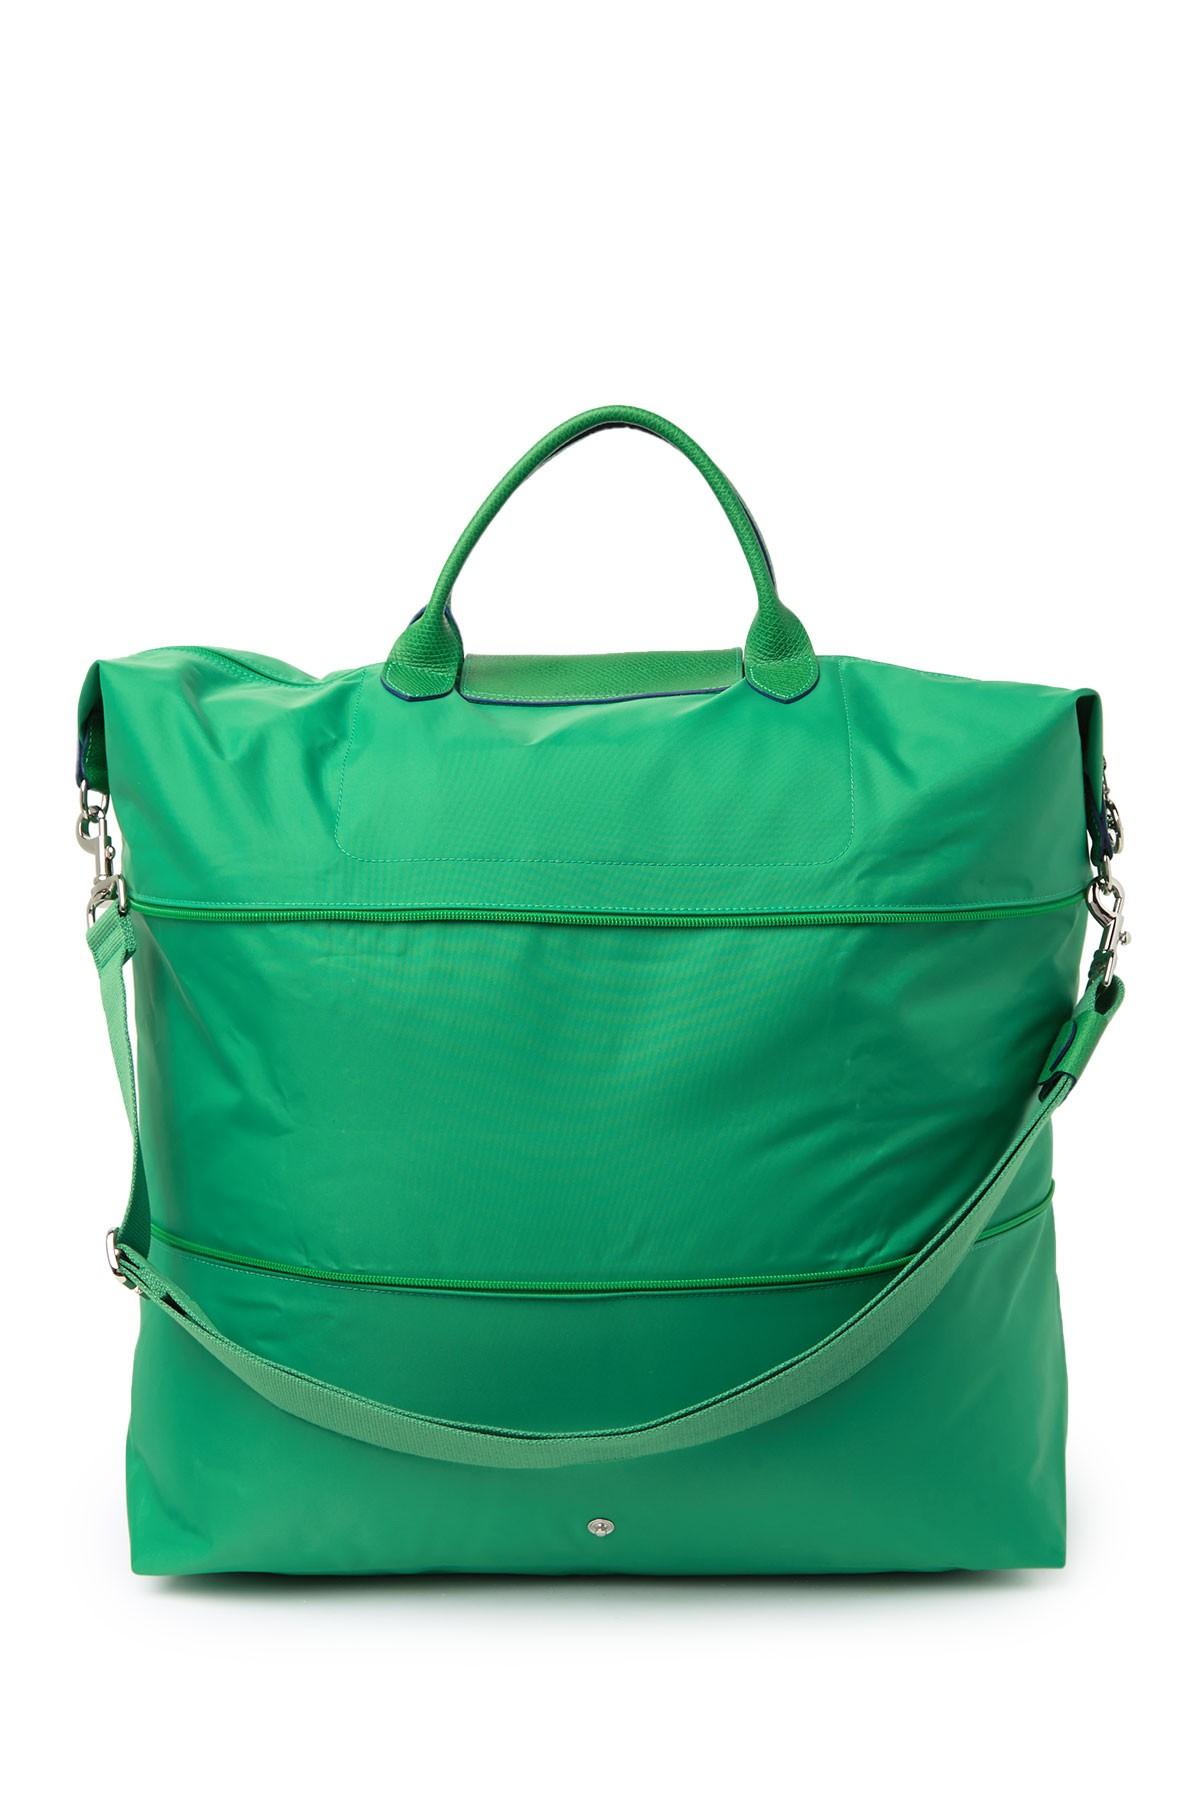 Longchamp Synthetic Le Pliage Expandable Nylon Tote in Green - Lyst